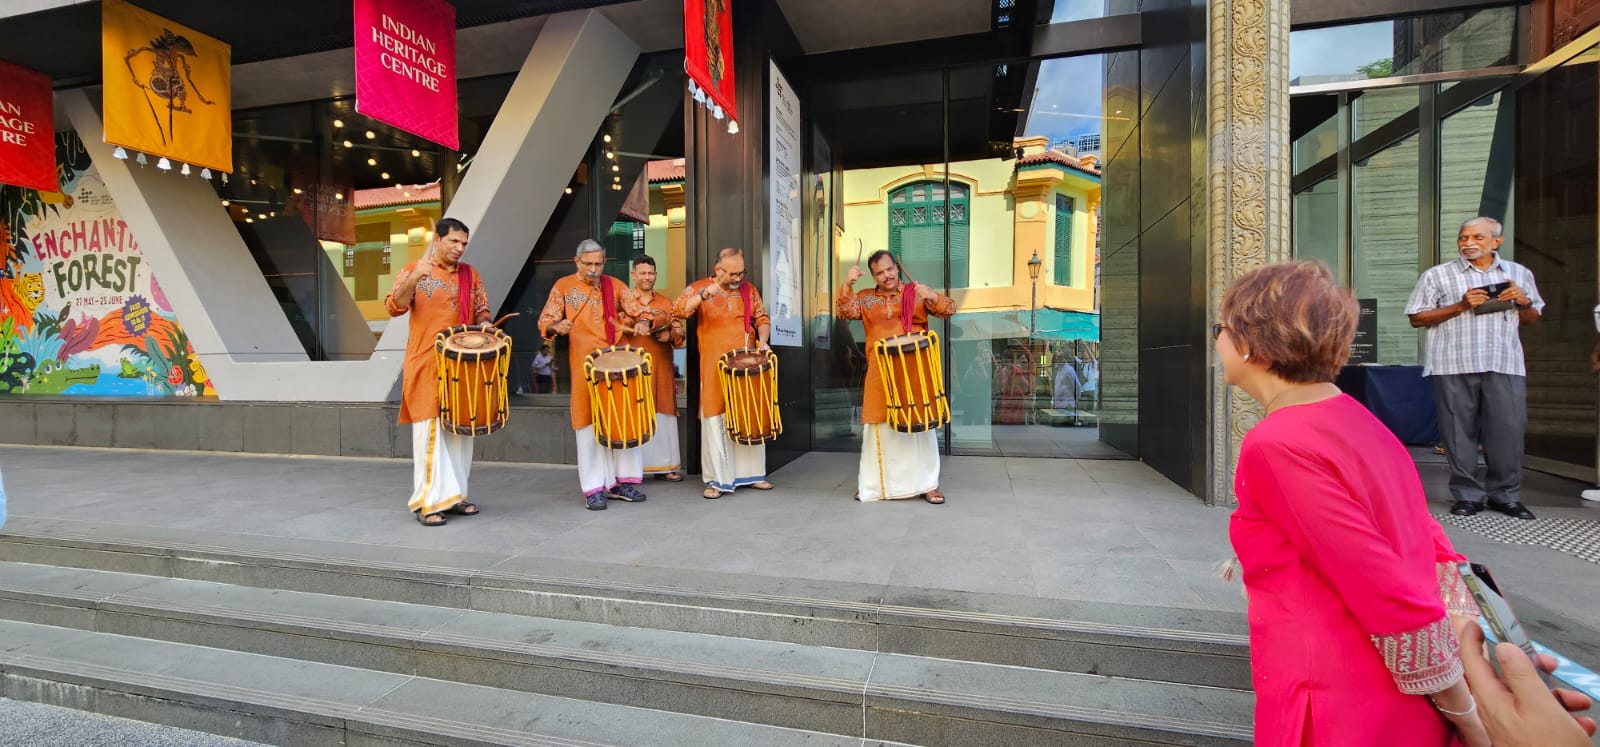 75th Anniversary Celebrations at the Indian Heritage Centre